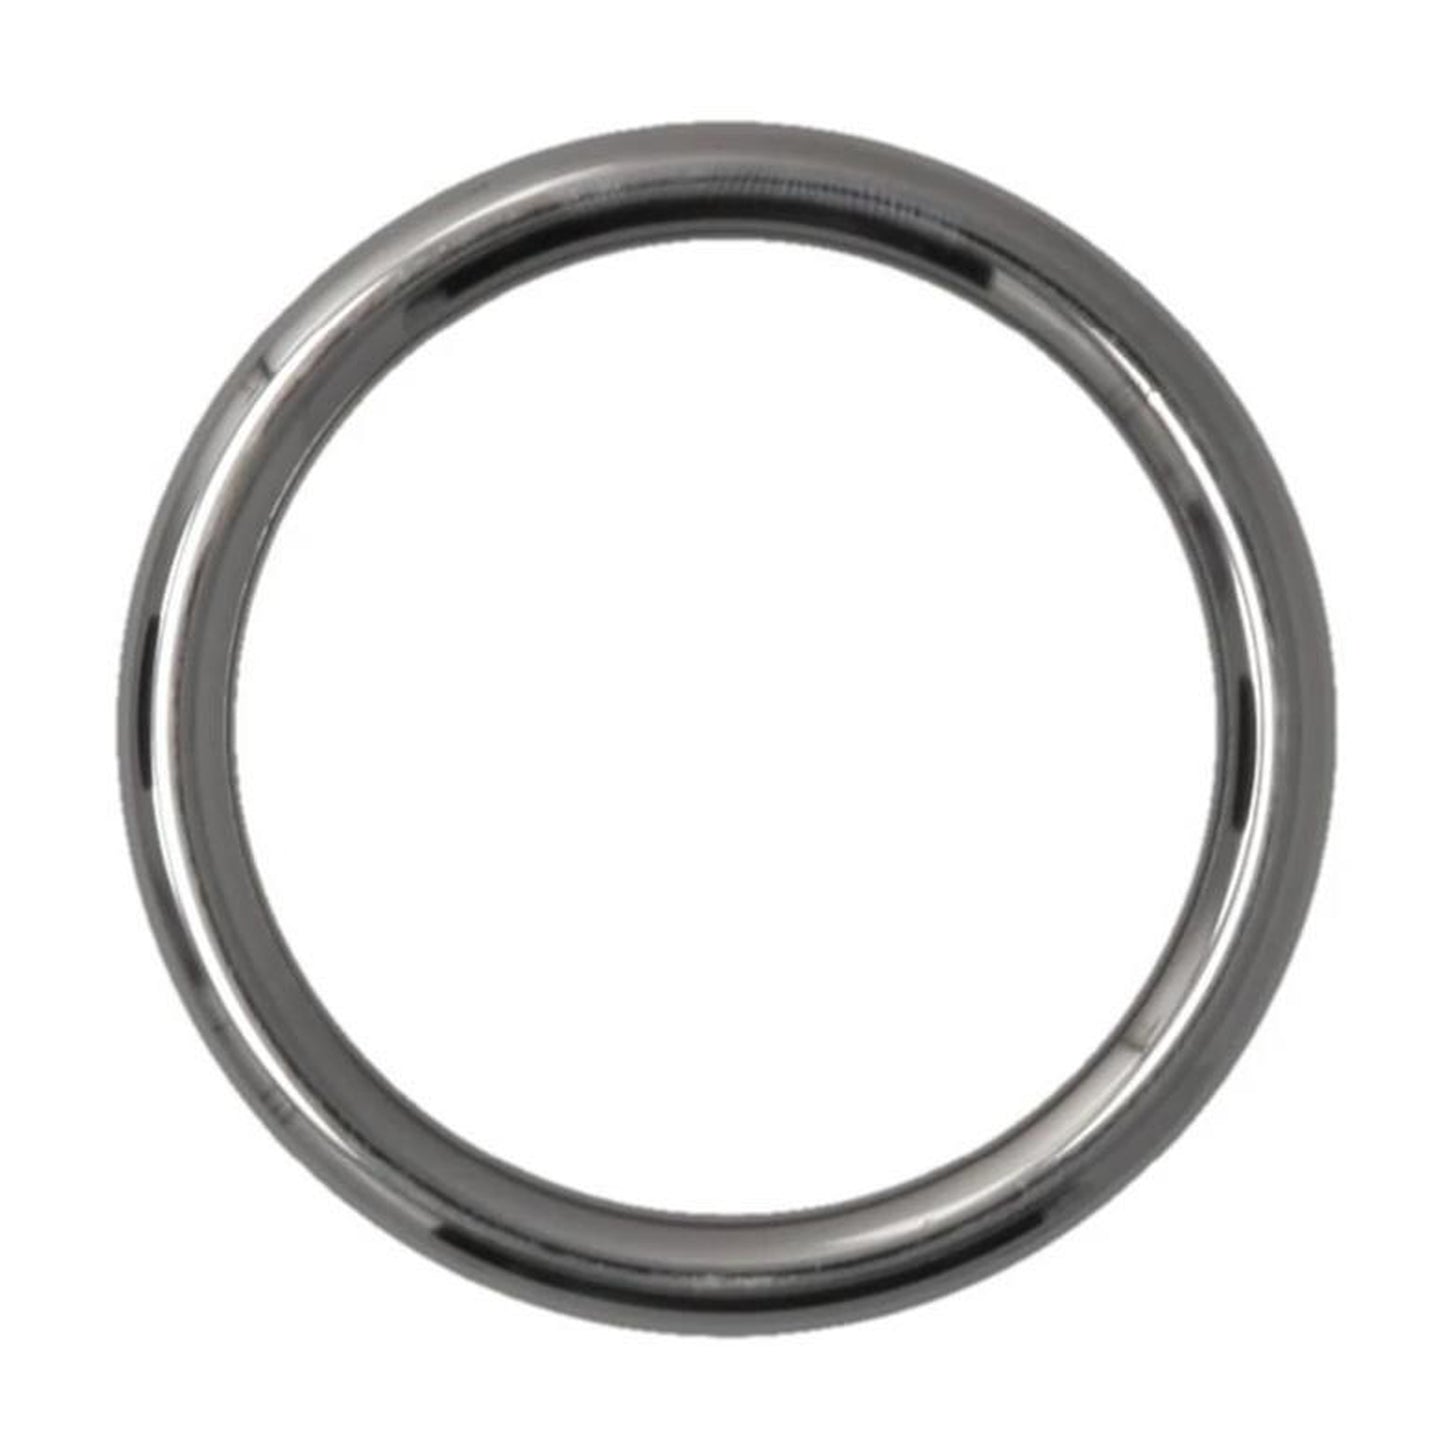 Thick Metal Cock Ring, Stainless 1.5 inch diameter